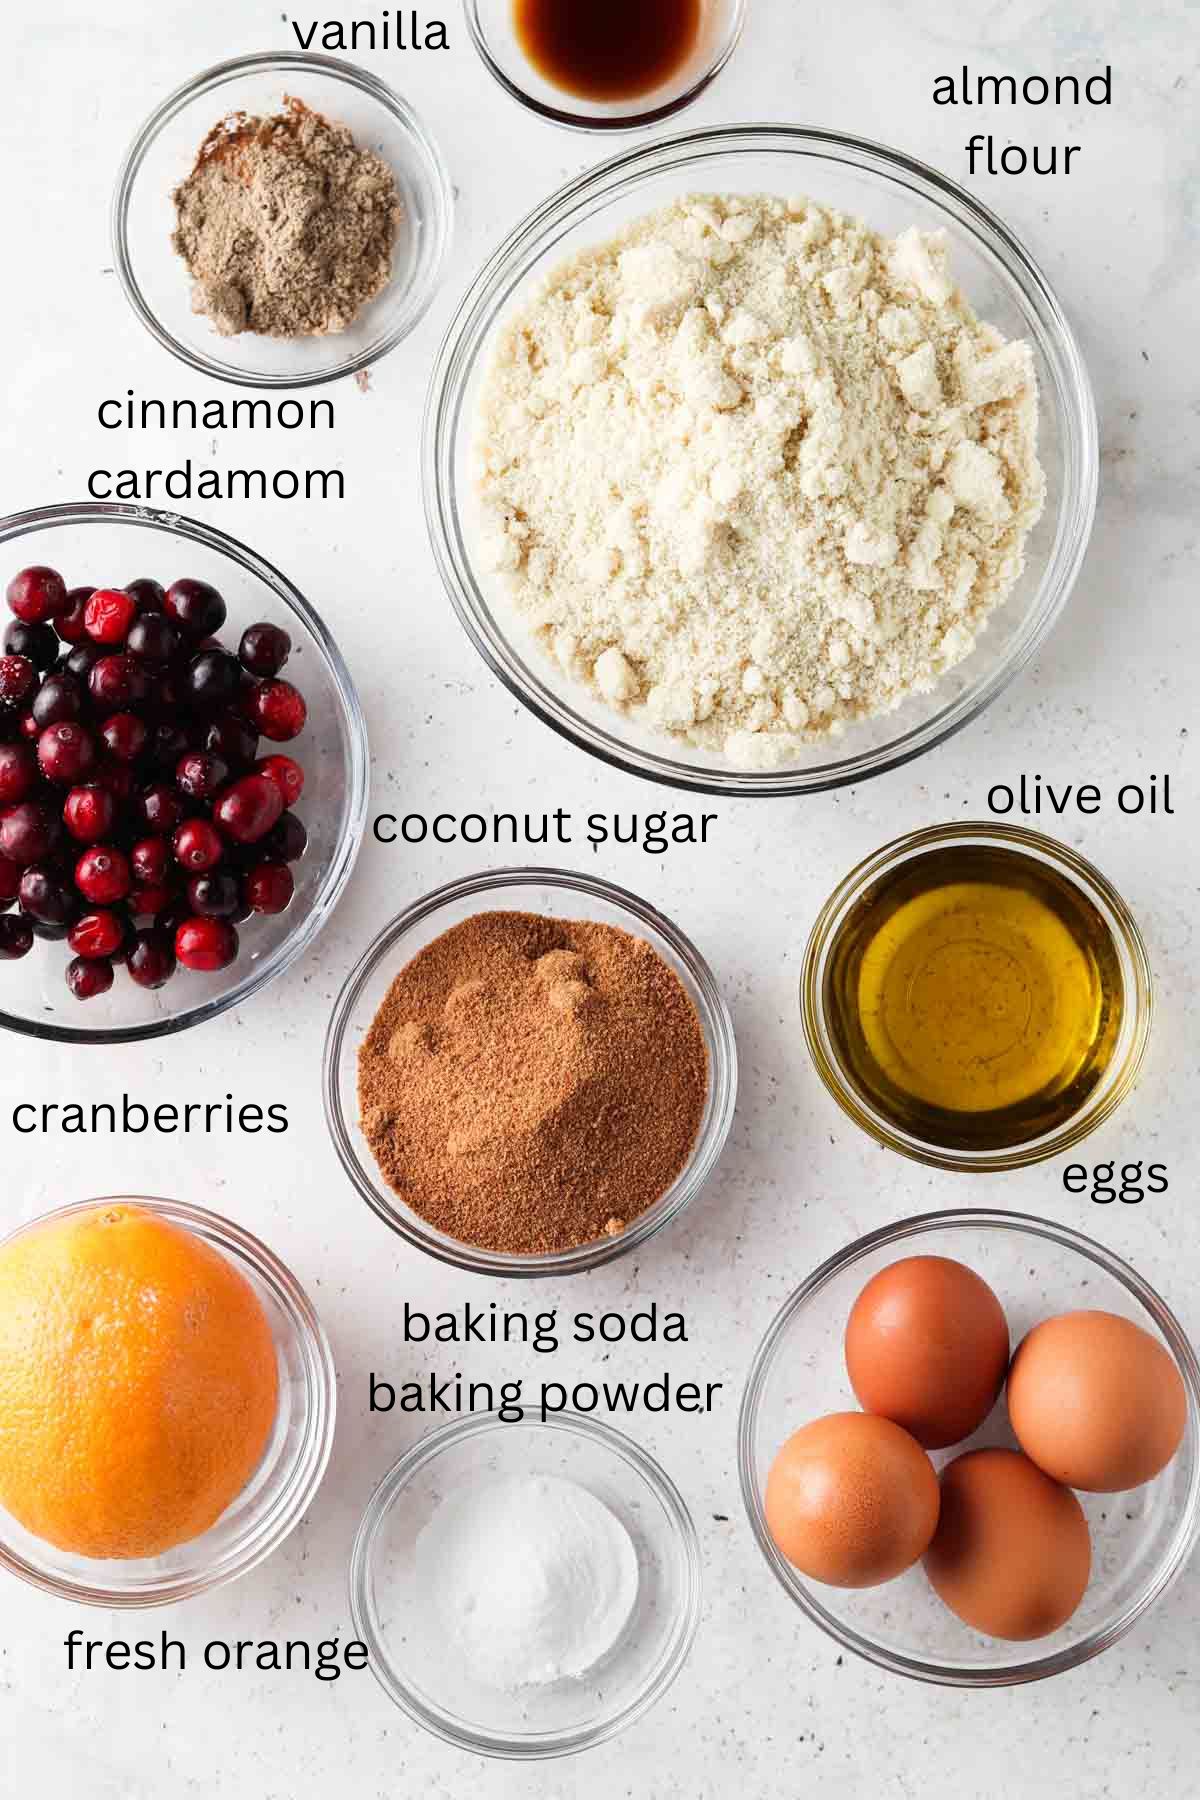 Cake ingredients in small glass bowls on a counter top.